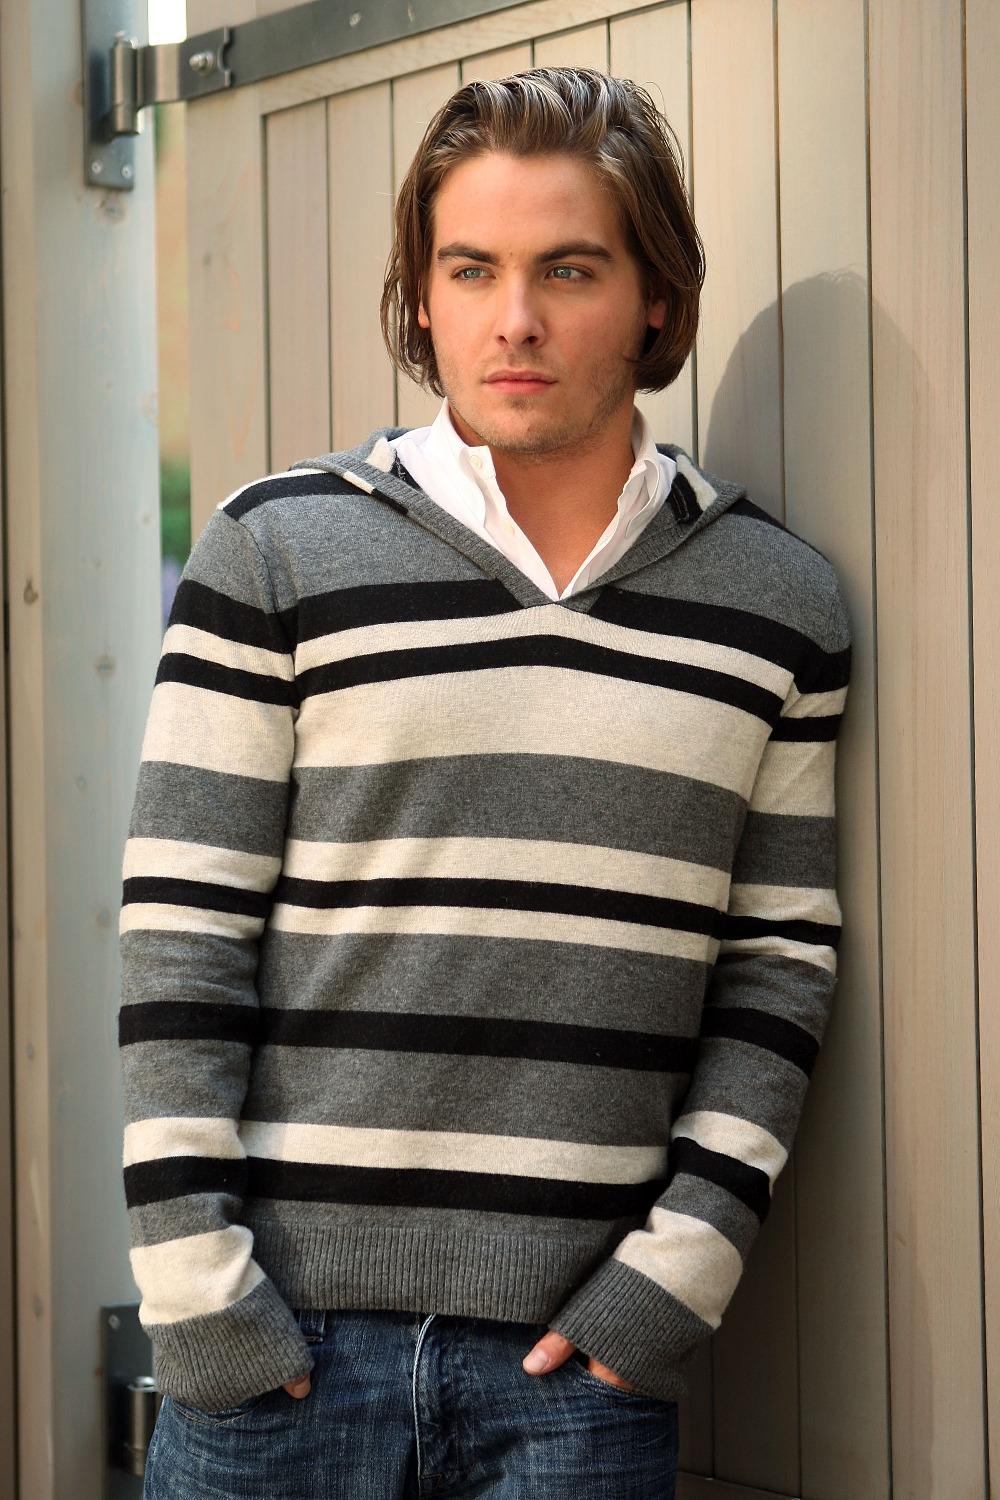 Photo №8248 Kevin Zegers.